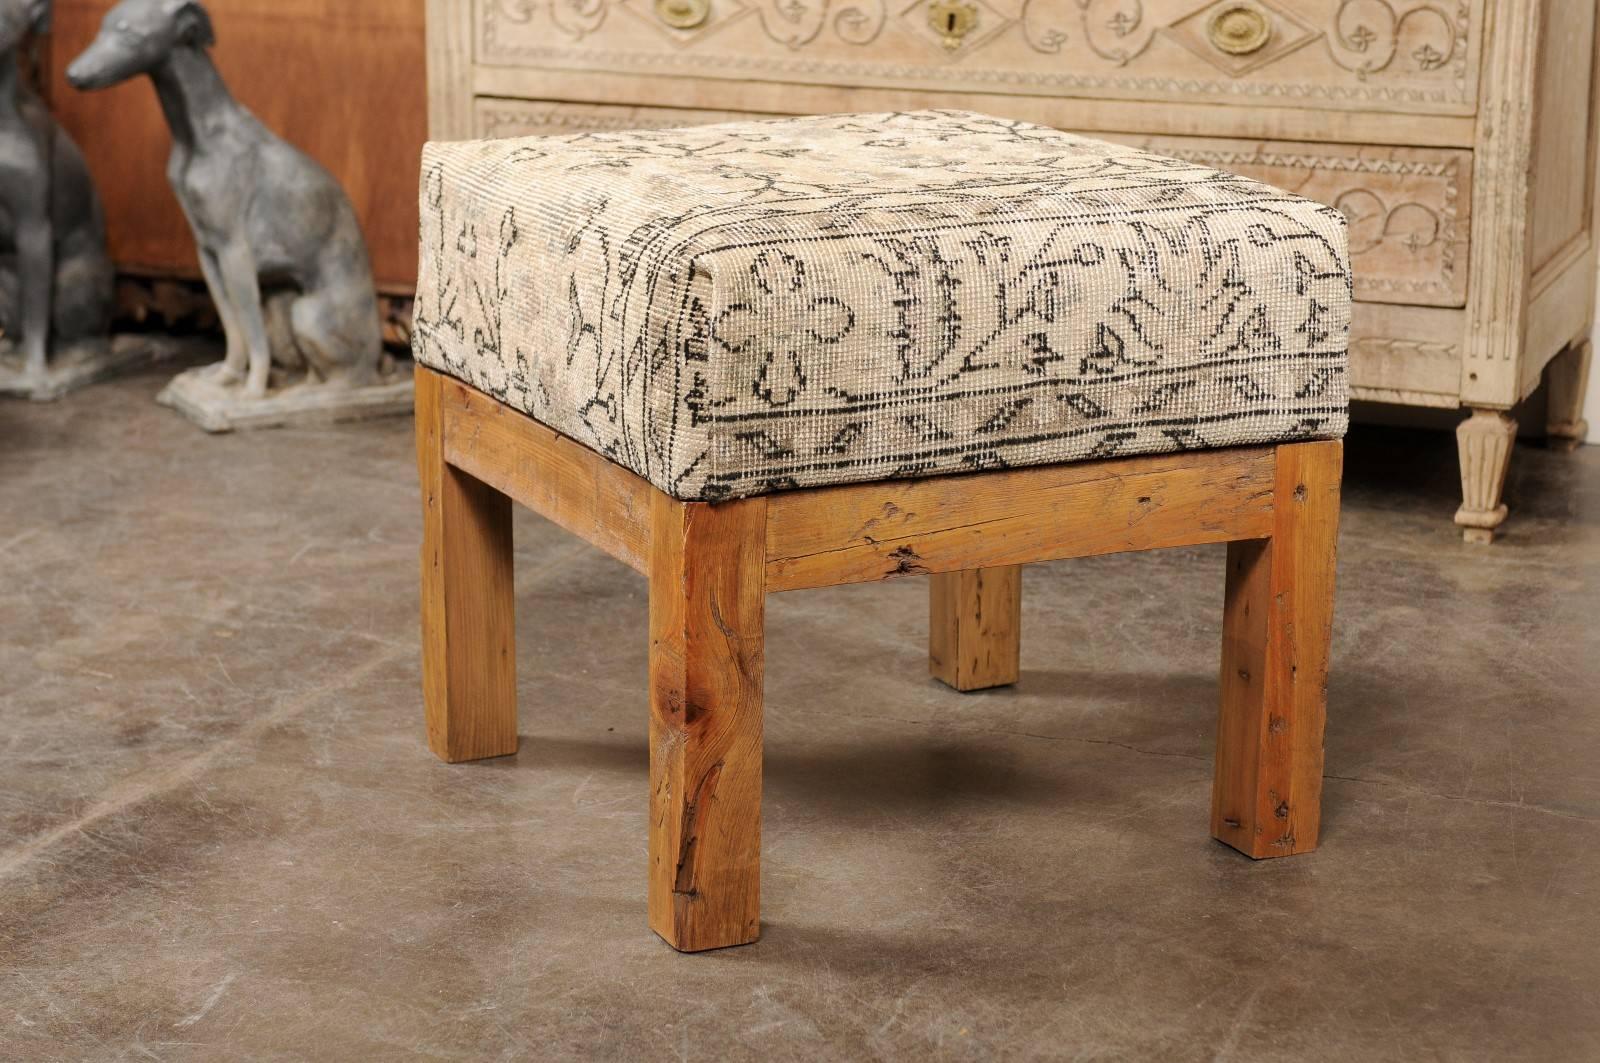 This wooden stool features an upholstered seat covered with a vintage Turkish rug over an old wooden base also from Turkey. The comfortable seat features a light color tone adorned with various geometrical patterns, and is raised on four straight